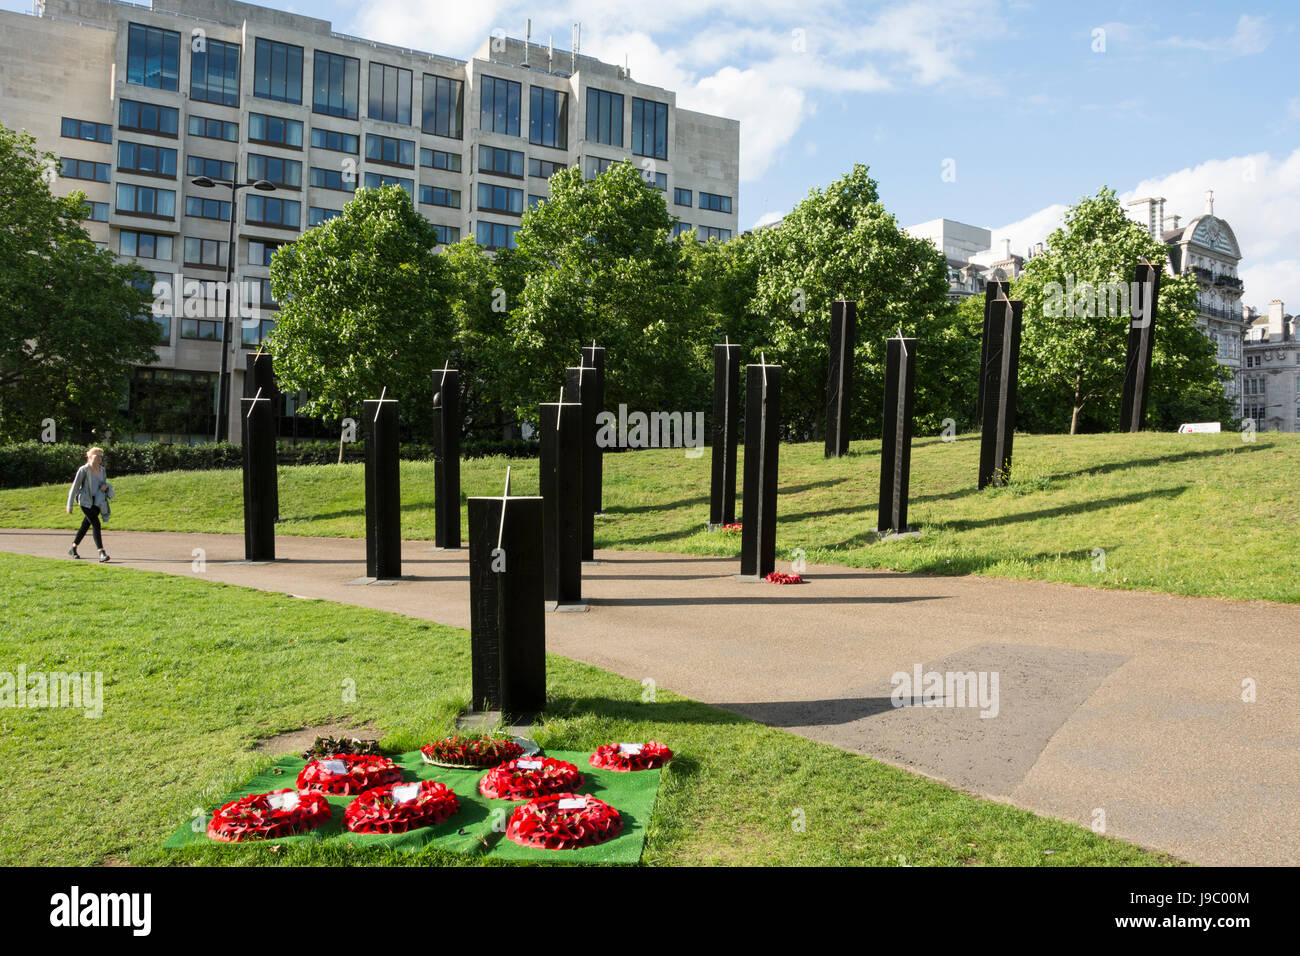 The Southern Stand – New Zealand’s War Memorial, Hyde Park Corner, London, UK Stock Photo